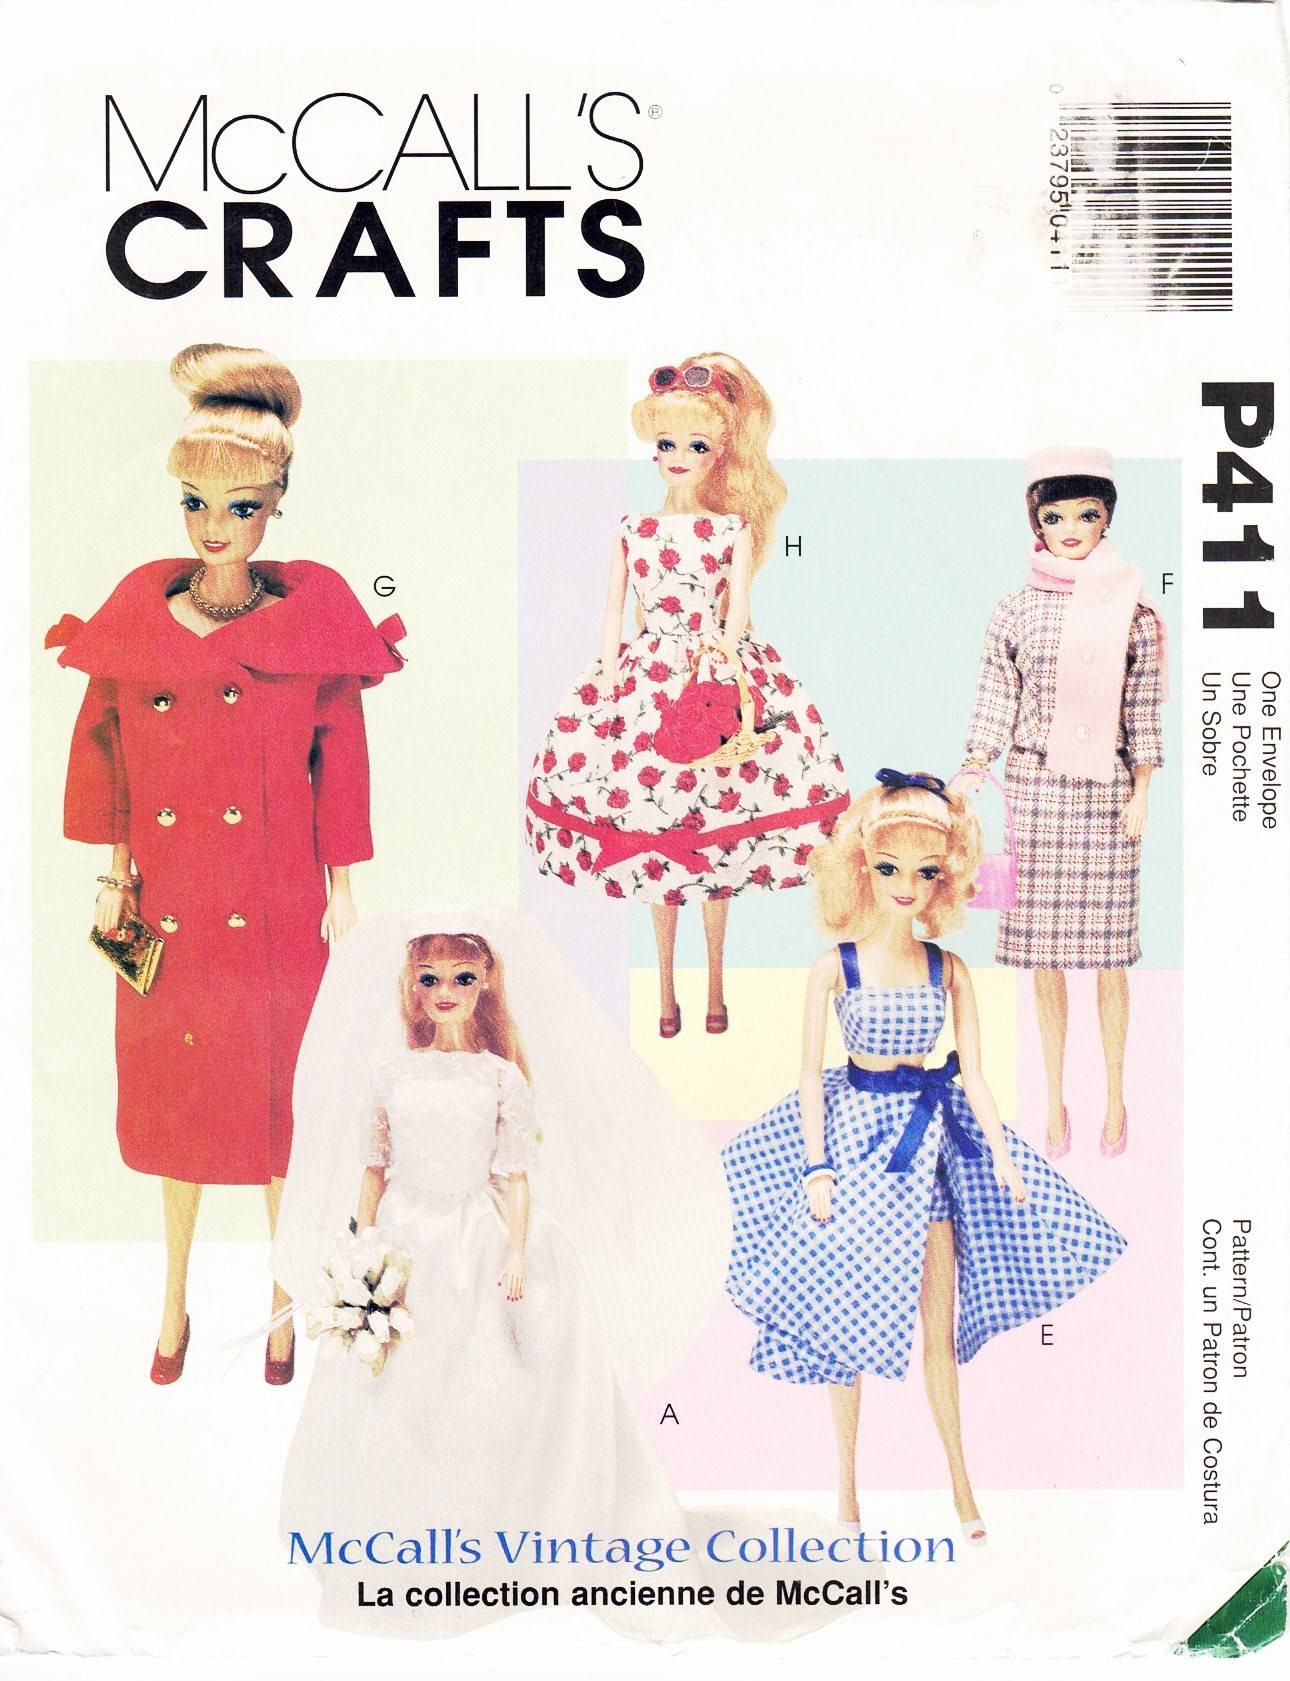 McCalls Pattern 9664 Barbie Vintage Collection Doll Clothes